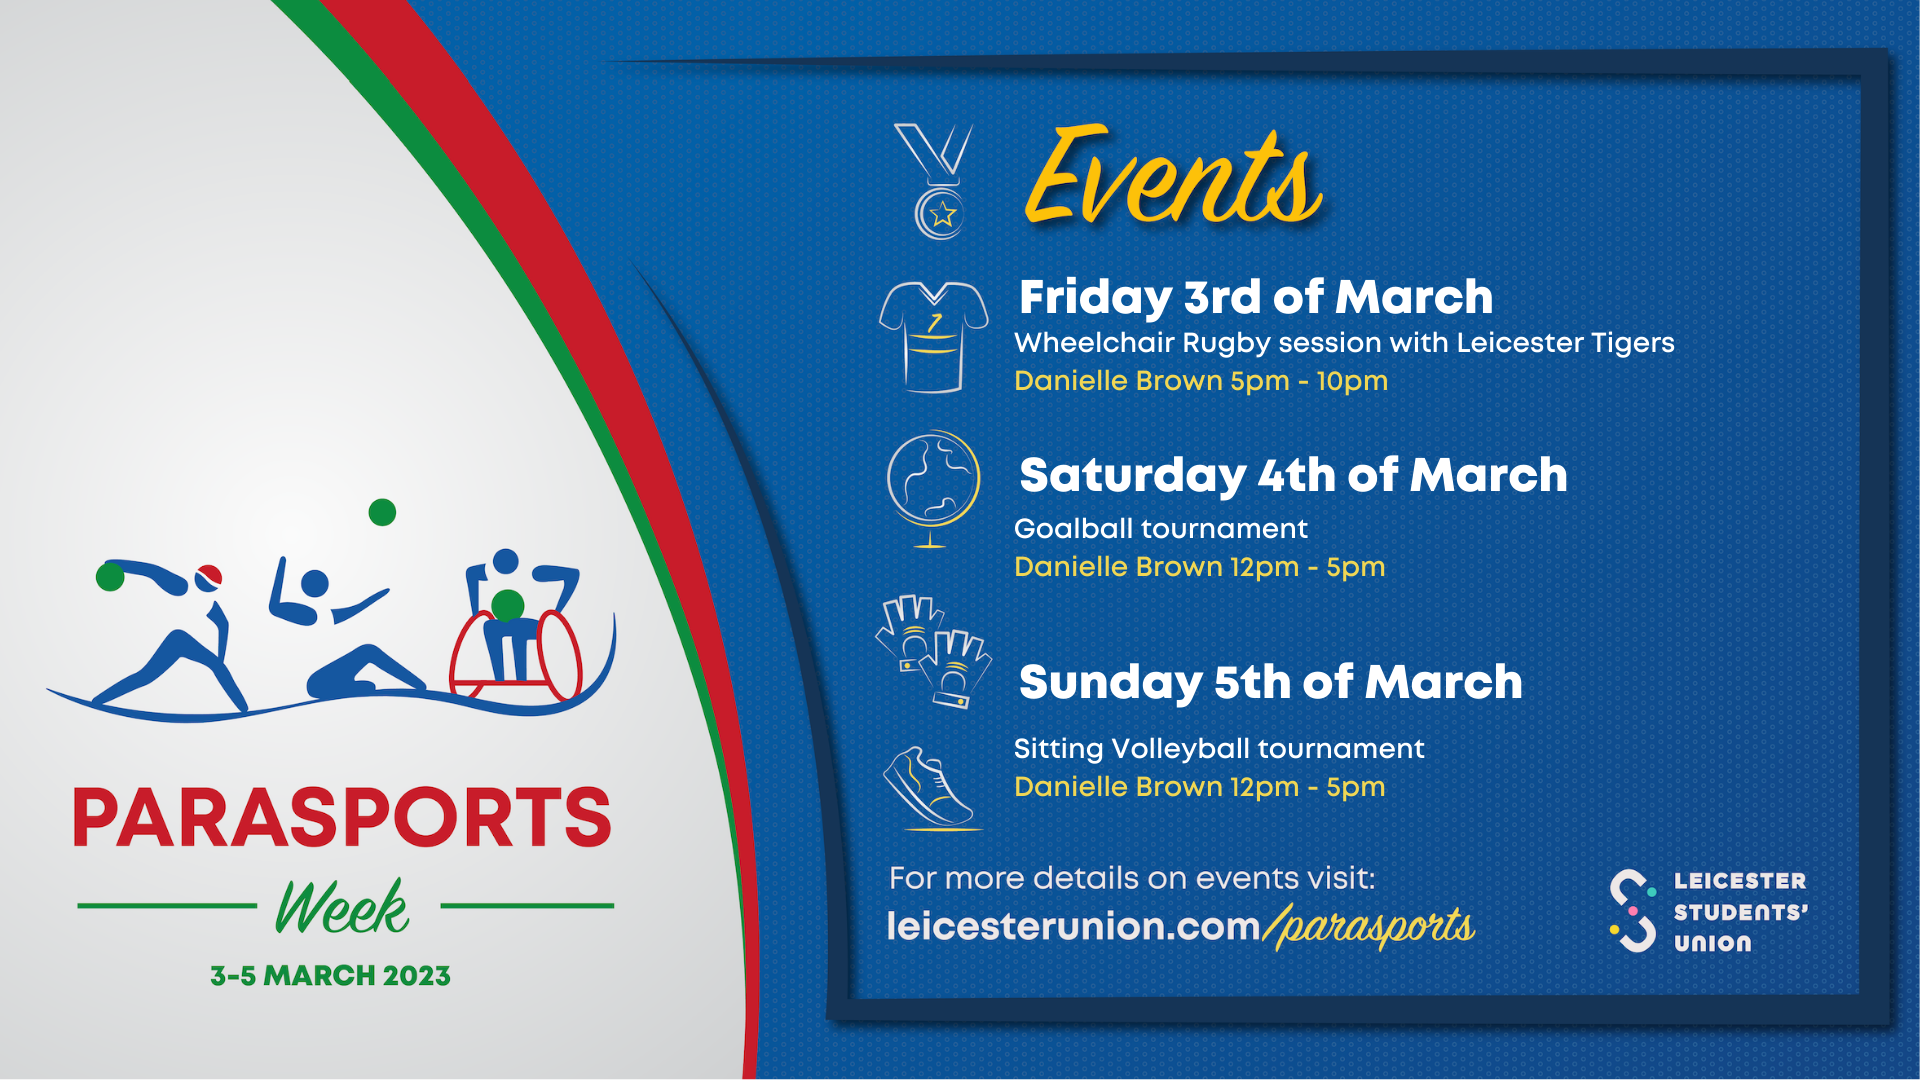 Parasports Week 3-5th March 2023, Events: Friday 3rd of March Wheelchair Rugby session with Leicester Tigers Danielle Brown 5pm - 10pm, Saturday 4th of March Goalball tournament Danielle Brown 12pm - 5pm, Sunday 5th of March Sitting Volleyball tournament Danielle Brown 12pm - 5pm